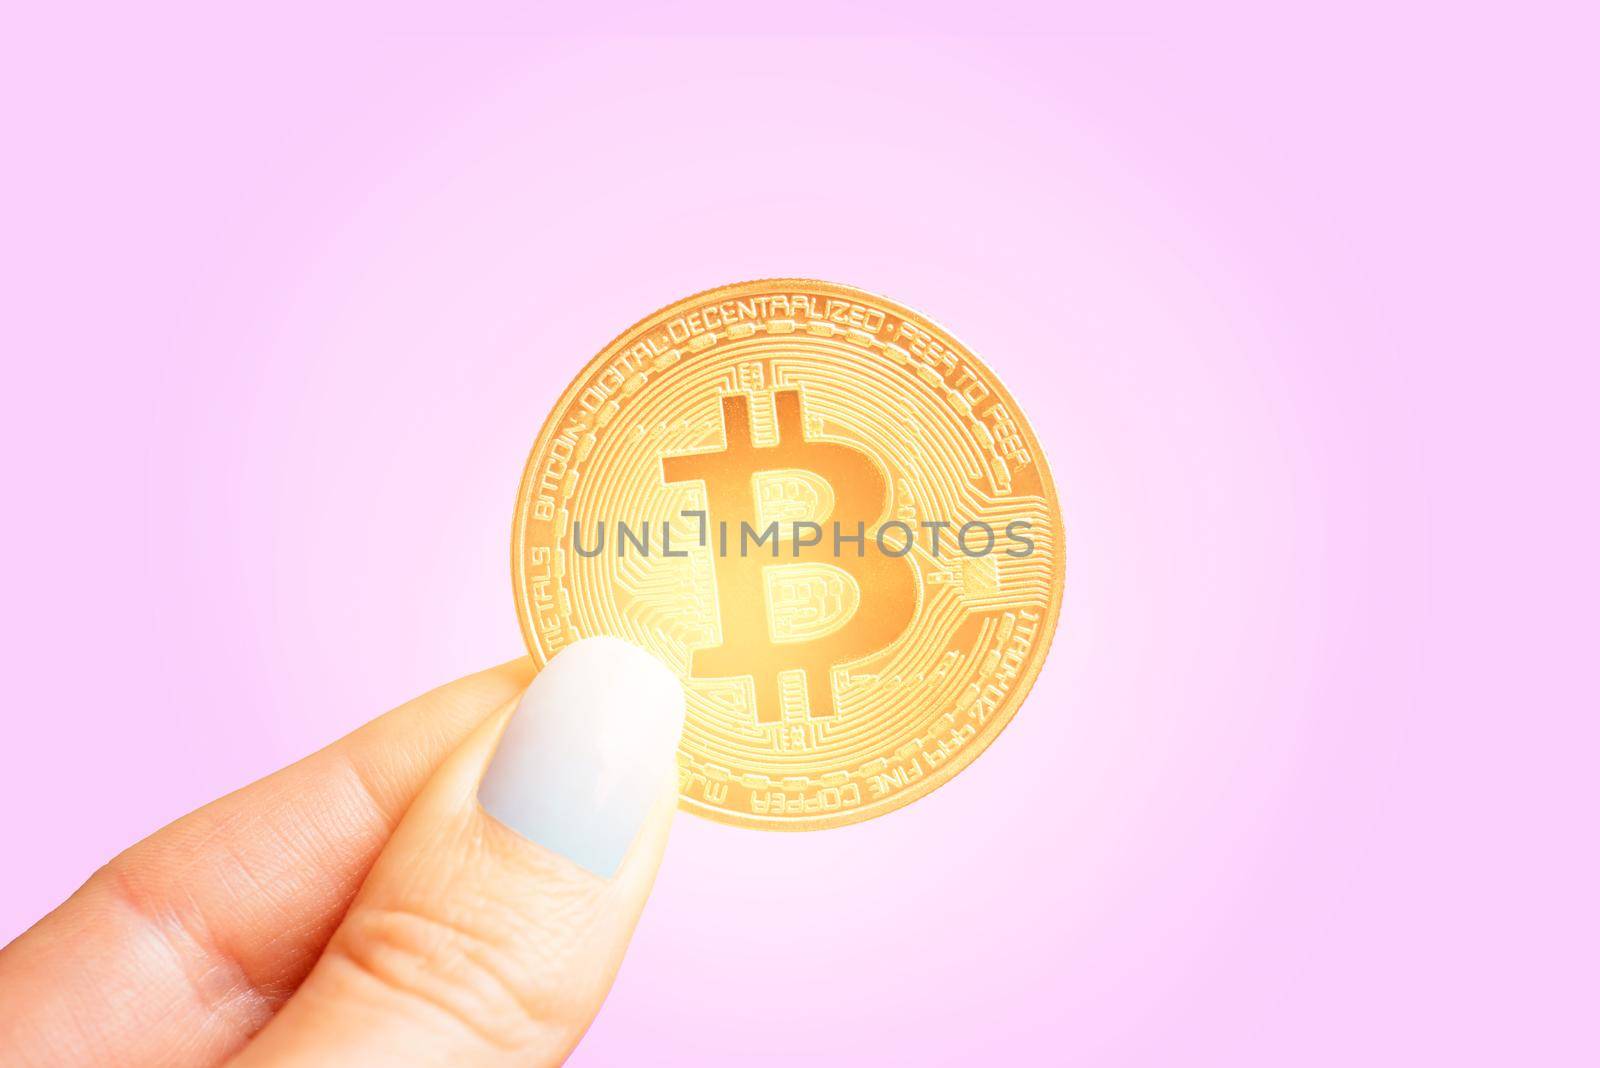 Female hand holding glowing gold bitcoin on a pink background, symbol of virtual money.